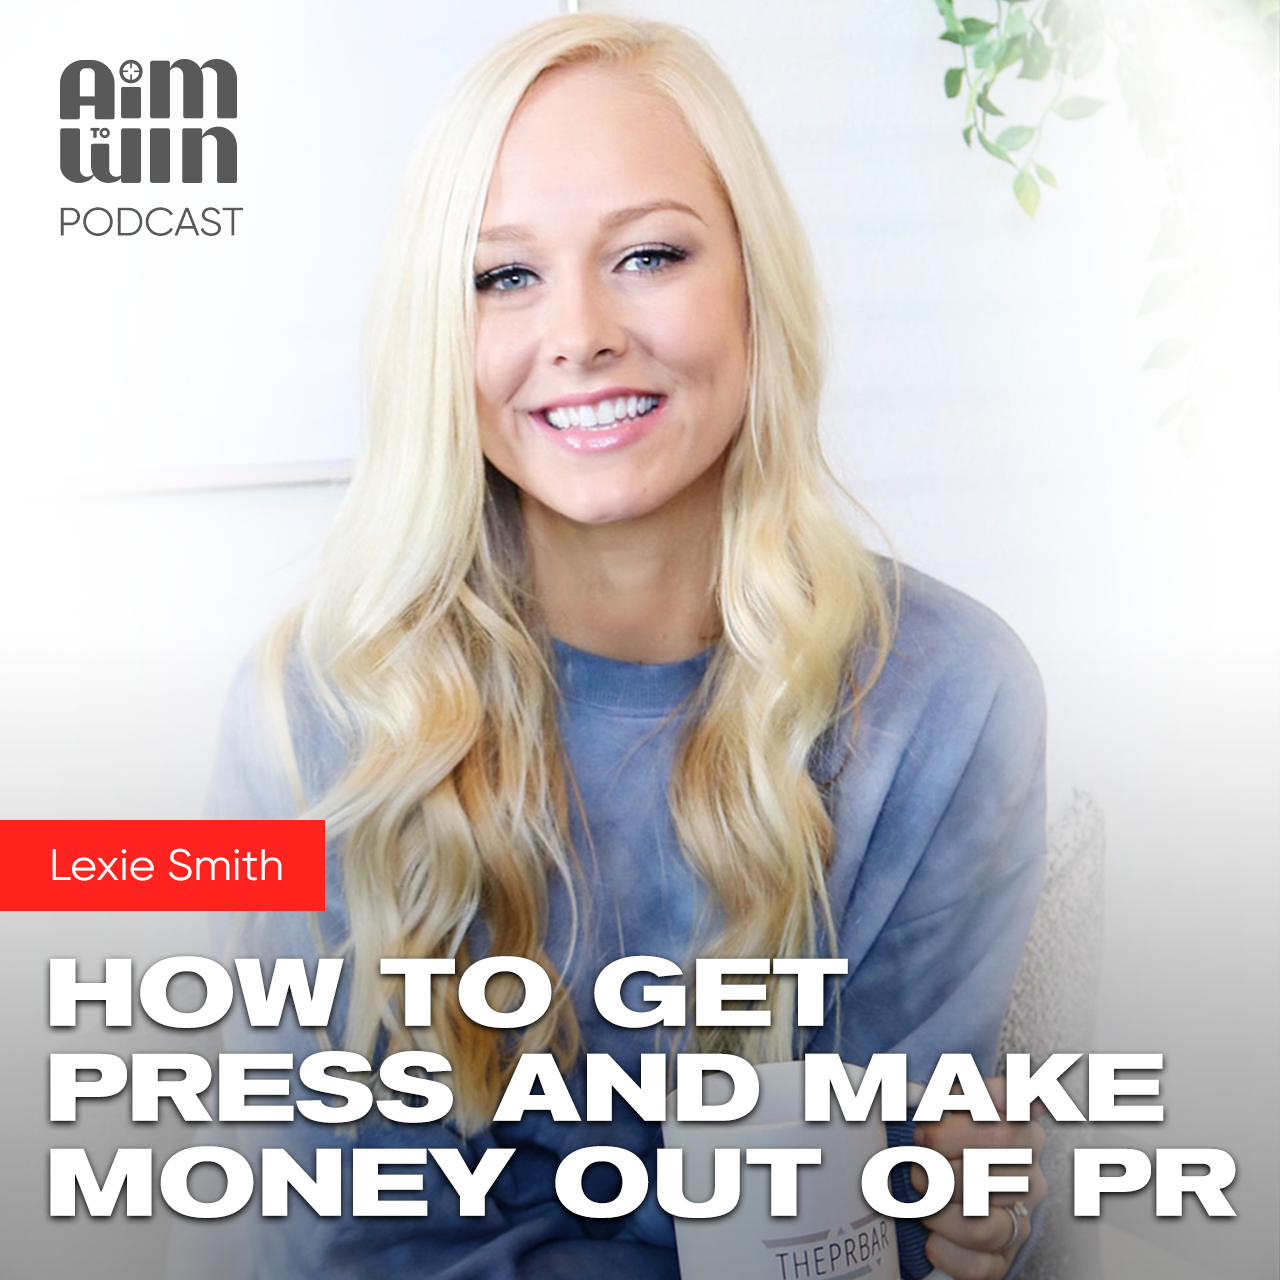 How to Get Press and Make Money Out of PR with Lexie Smith